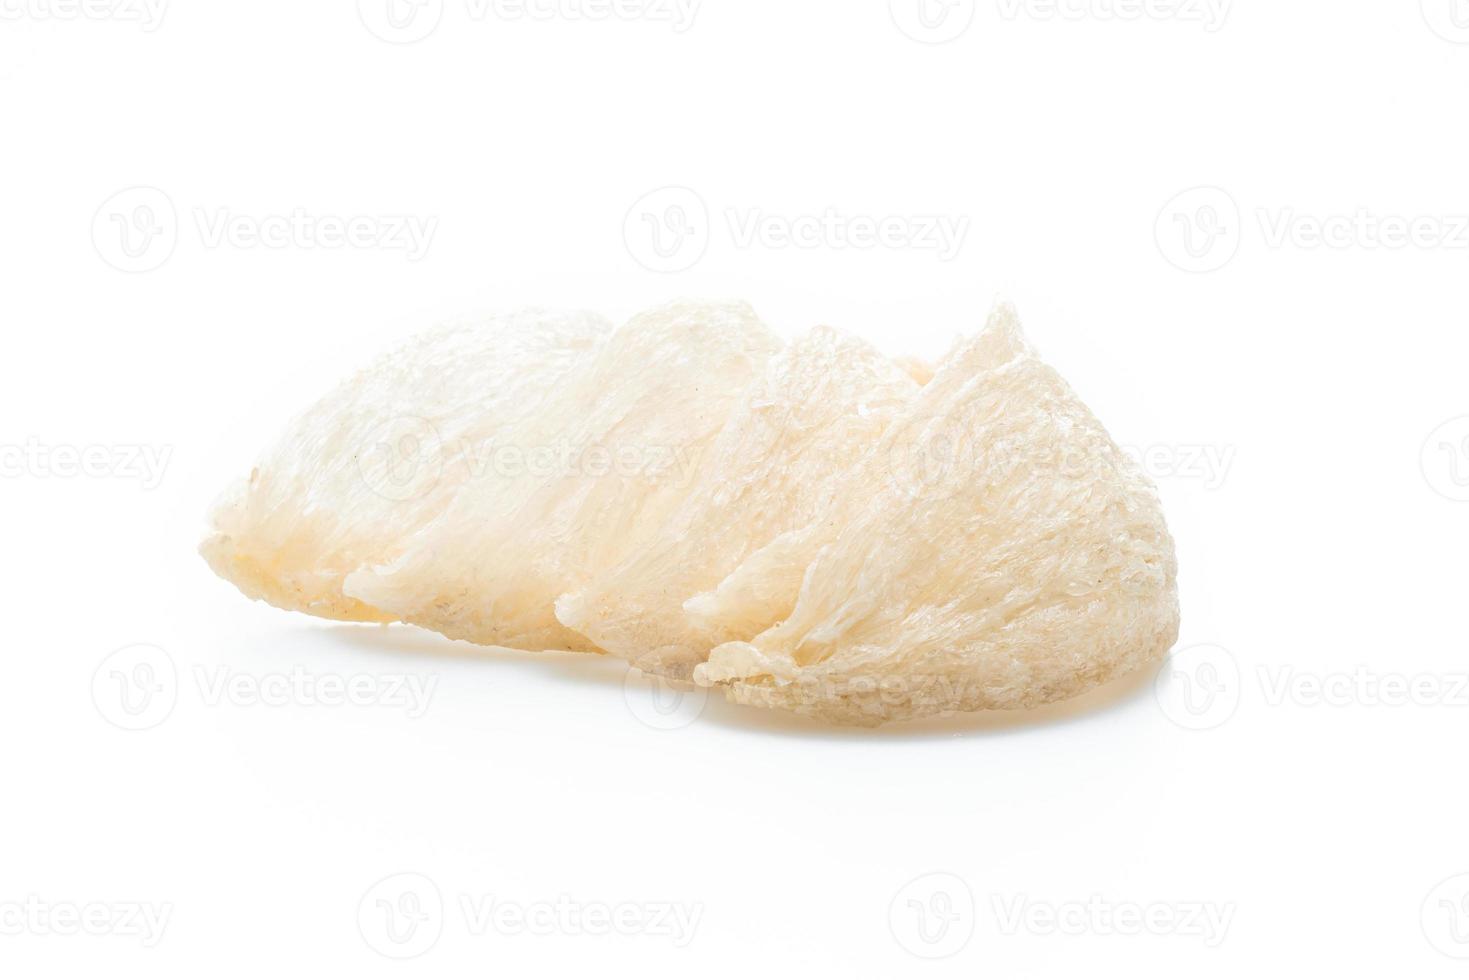 Fresh edible bird's nest or Swallow nest raw material cuisine expensive food for healthy photo